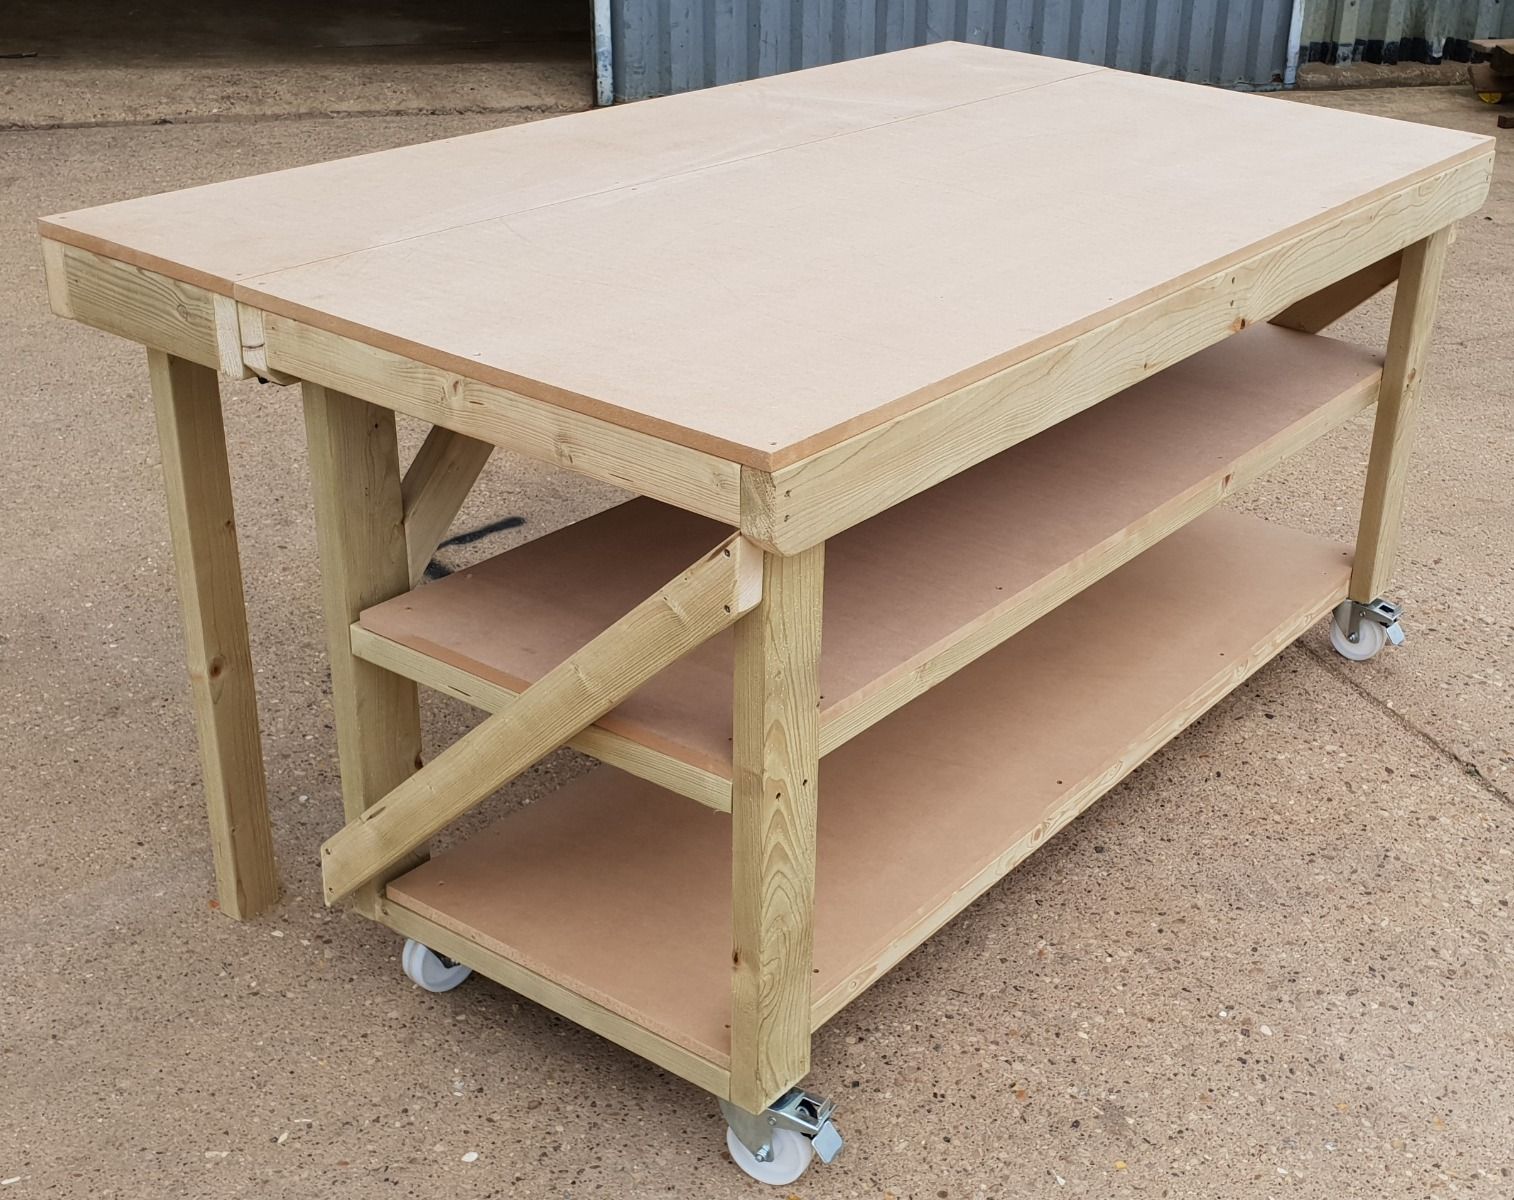 New Wooden Heavy Duty Work Bench/table/desk 3FT HAND MADEIN THE UK 18mm MDF TOP 